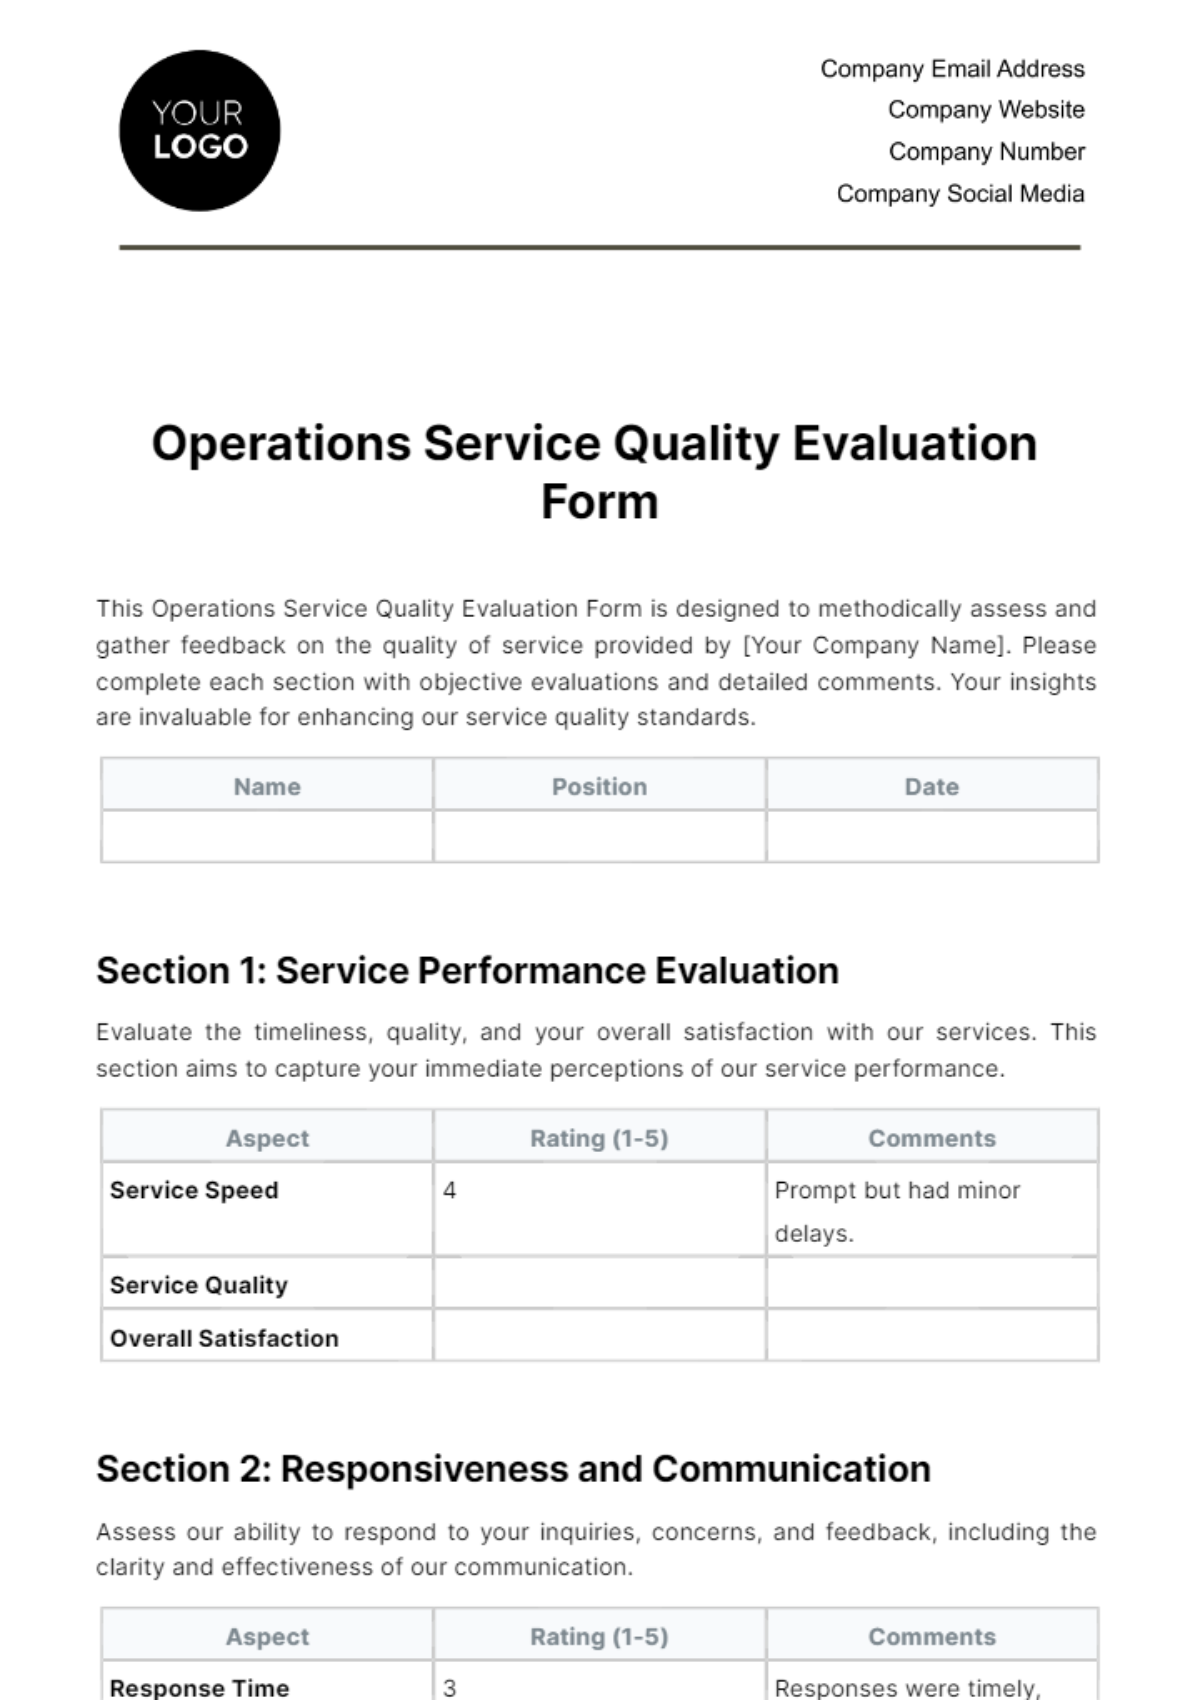 Operations Service Quality Evaluation Form Template